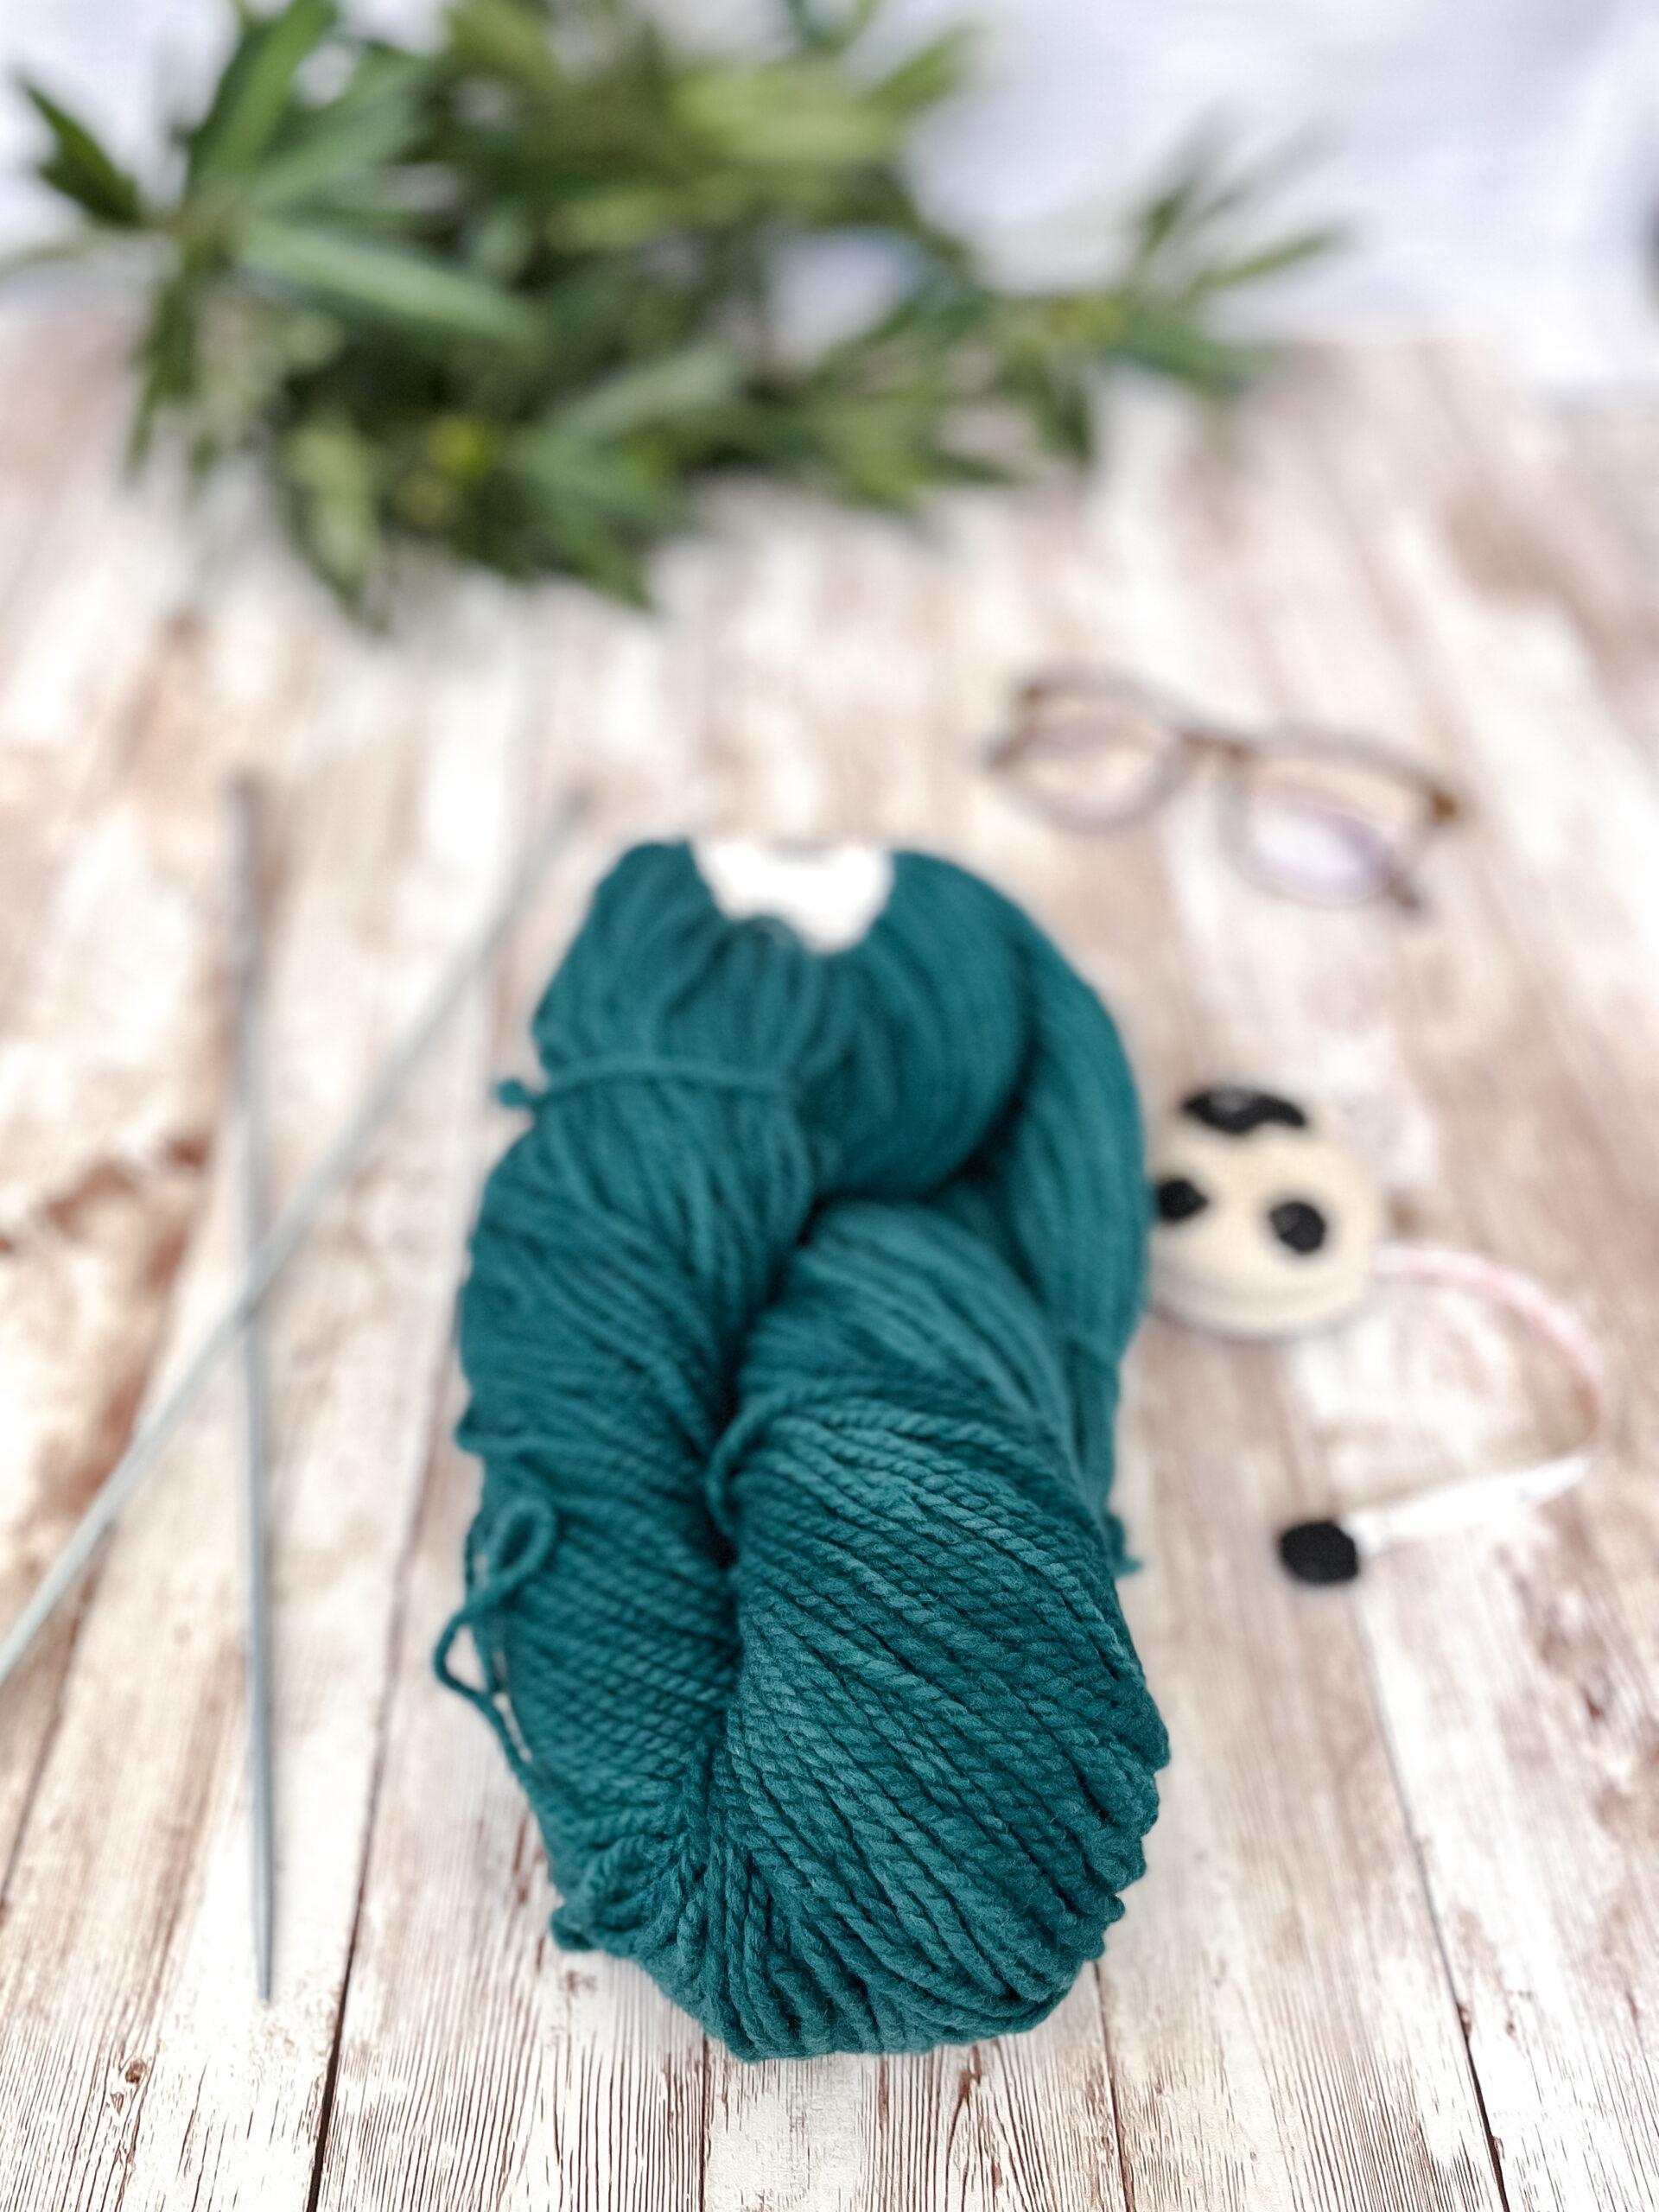 A hank of teal, Virginia farmed fine merino yarn rests on a wood plank, with knitting needles, a sheep measuring tape, a pair of reading glasses, and some greenery around it